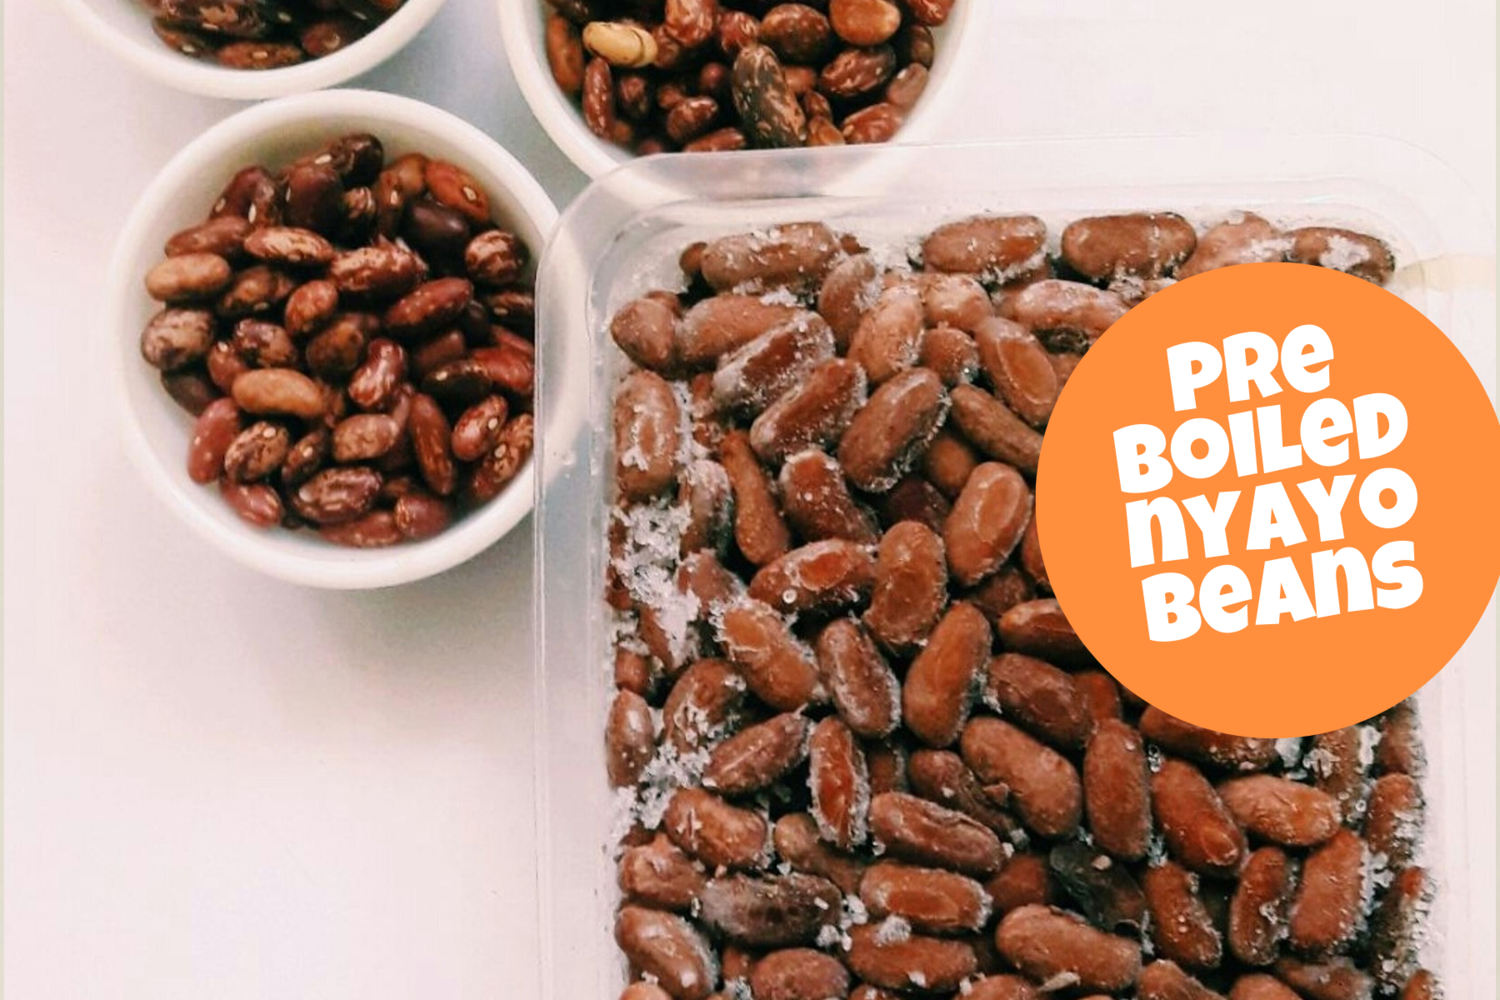 Pre Boiled Nyayo beans 500g pack